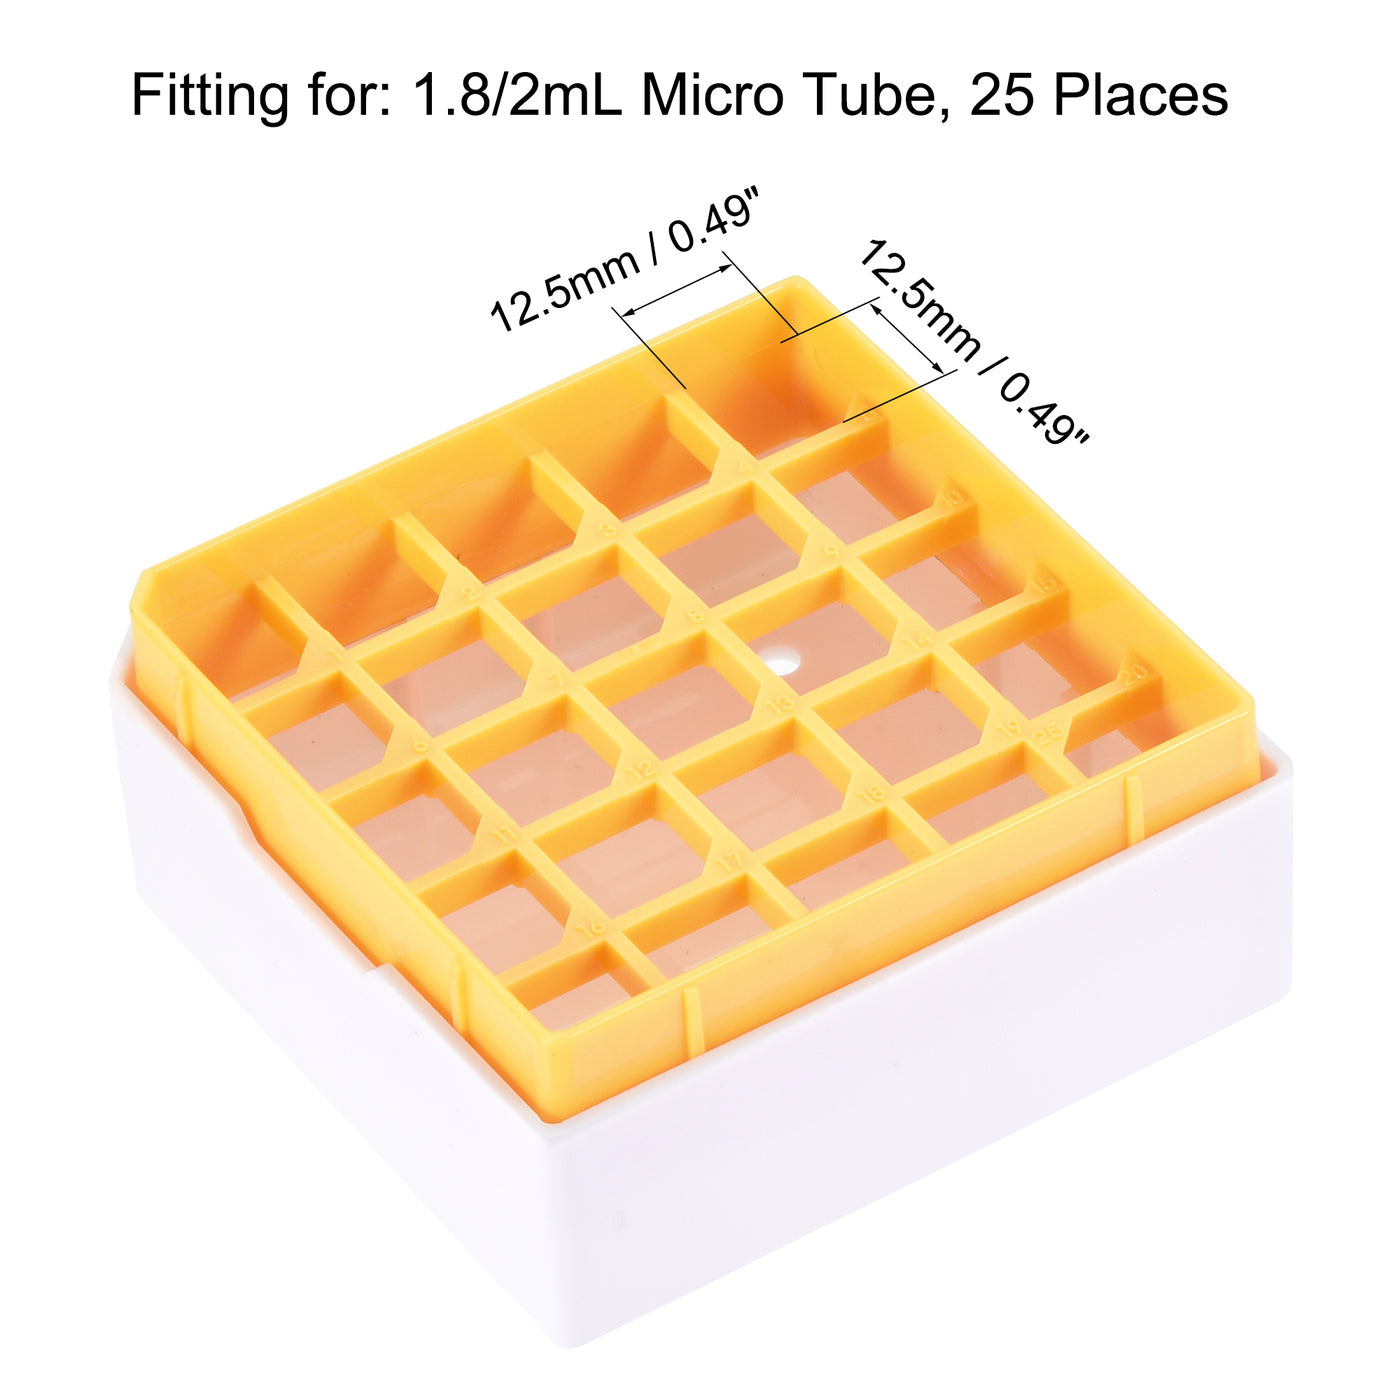 uxcell Uxcell Freezer Tube Box 25 Places Polypropylene Holder Rack for 1.8/2ml Microcentrifuge Tubes, Yellow